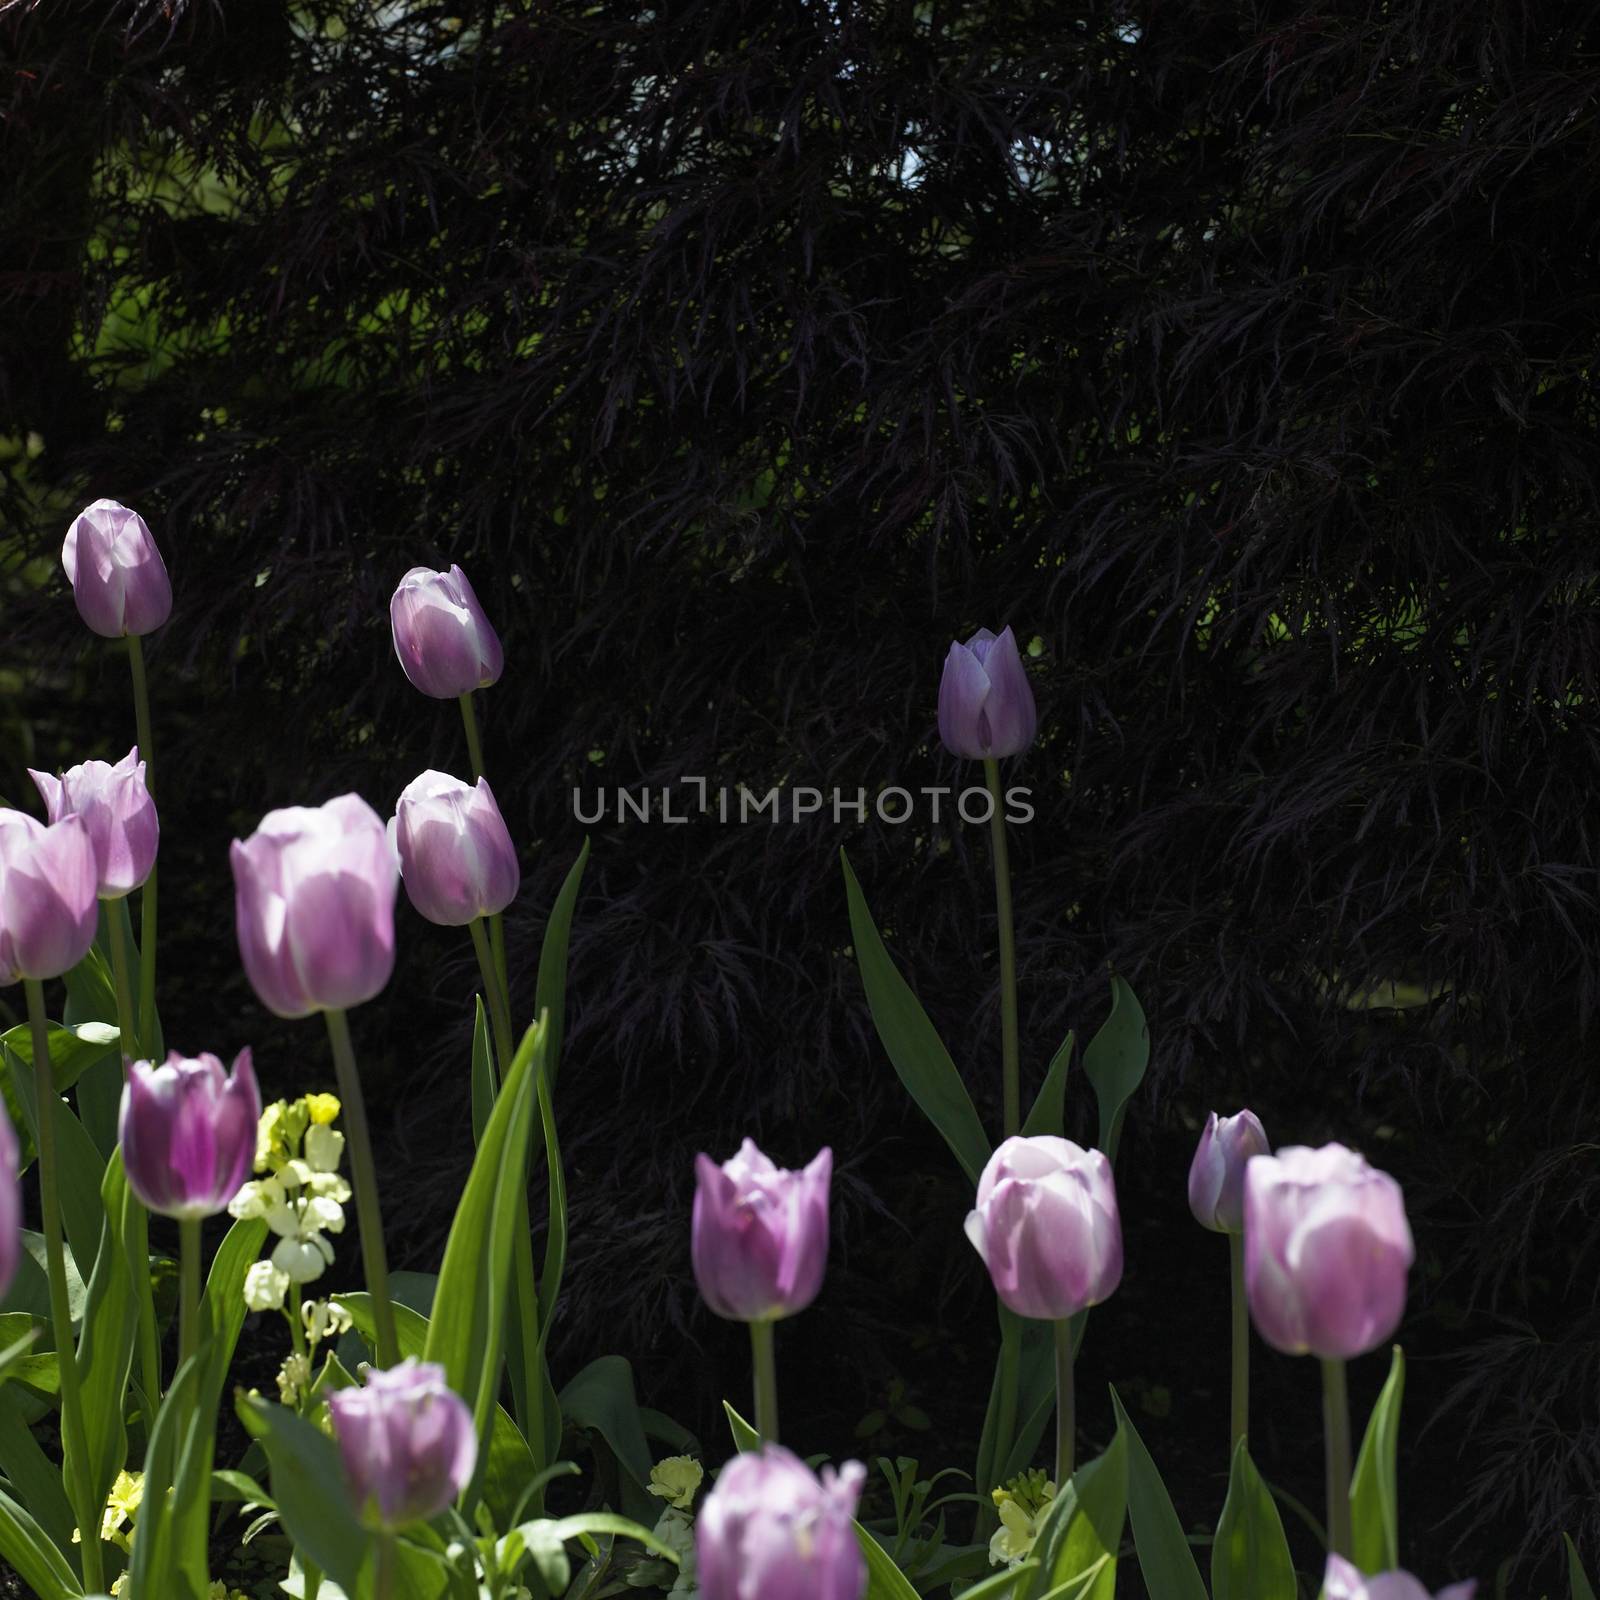 Large garden of purple tulips and smaller flowers